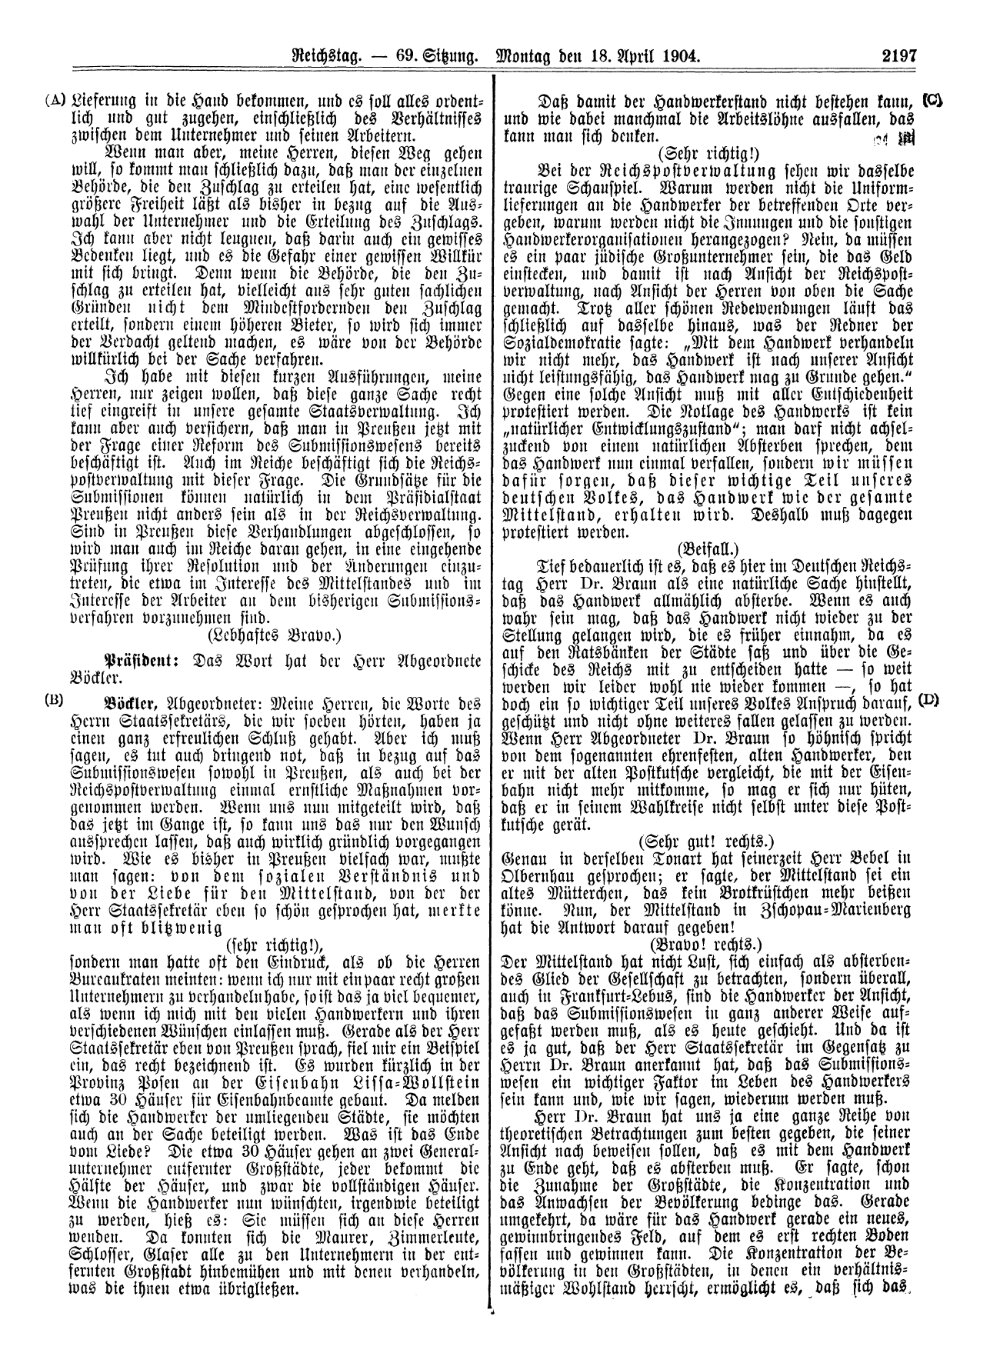 Scan of page 2197